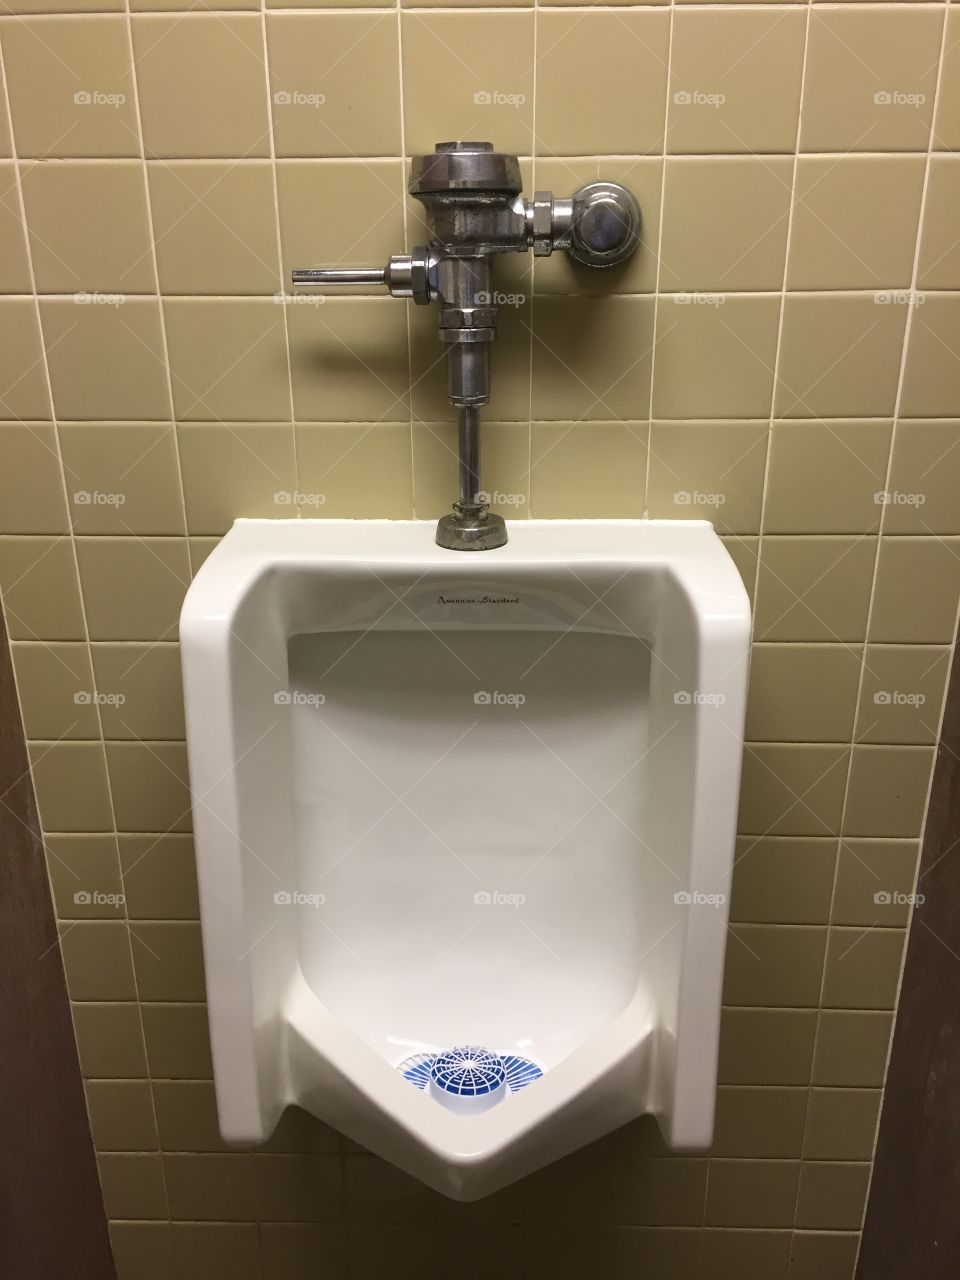 The Drabbest, Cleanest Urinal You Will Ever See. Look at It. LOOK AT IT!